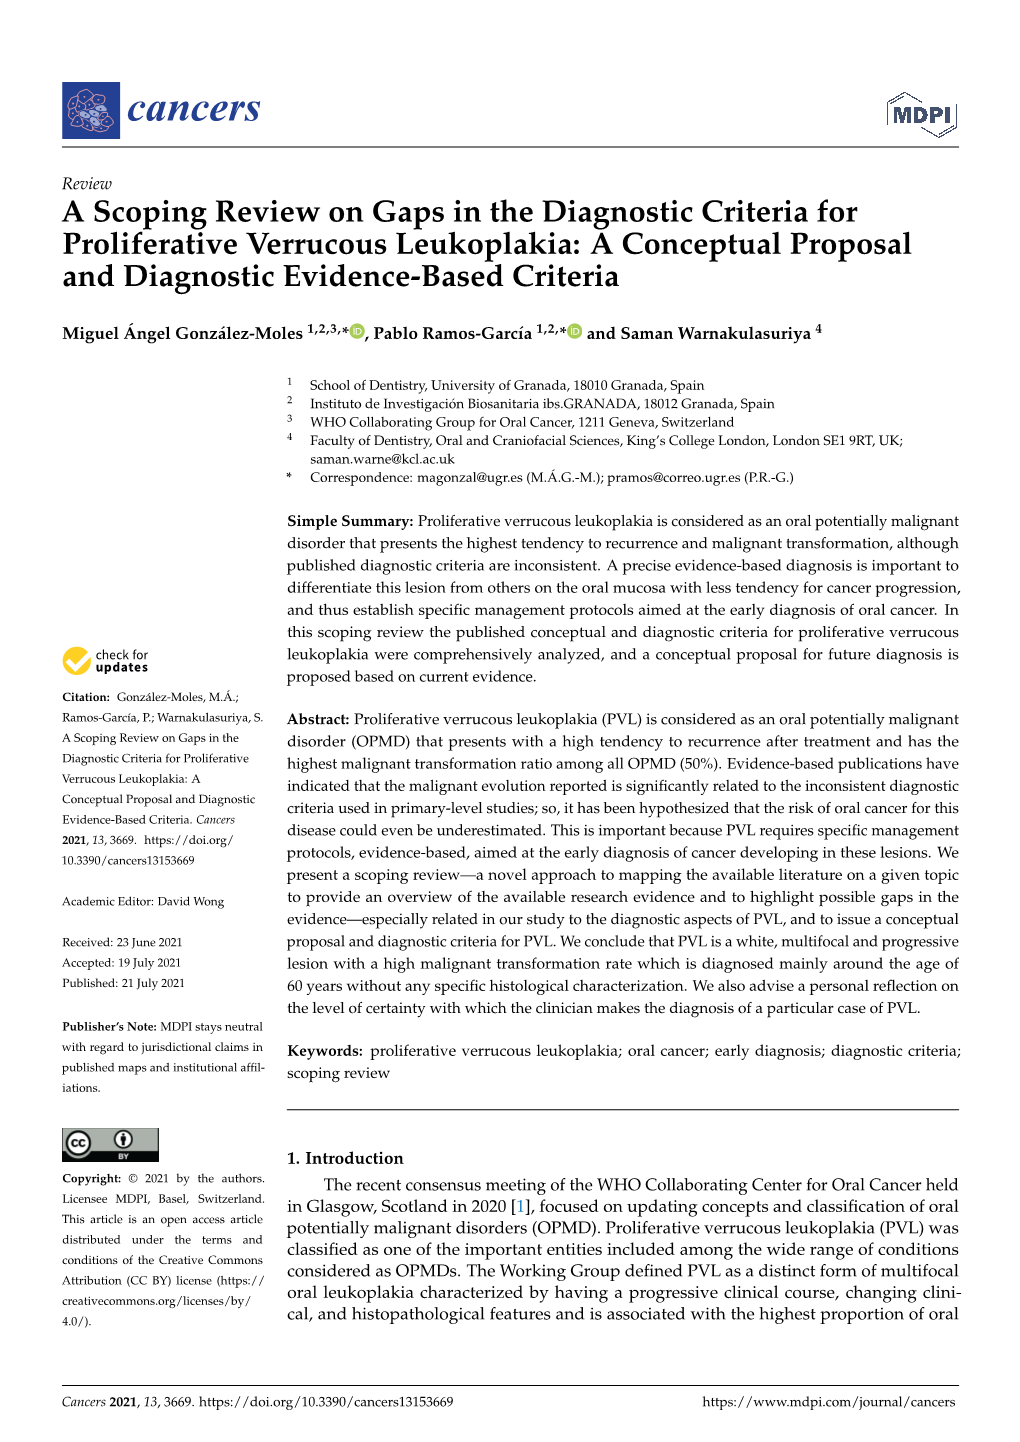 A Scoping Review on Gaps in the Diagnostic Criteria for Proliferative Verrucous Leukoplakia: a Conceptual Proposal and Diagnostic Evidence-Based Criteria